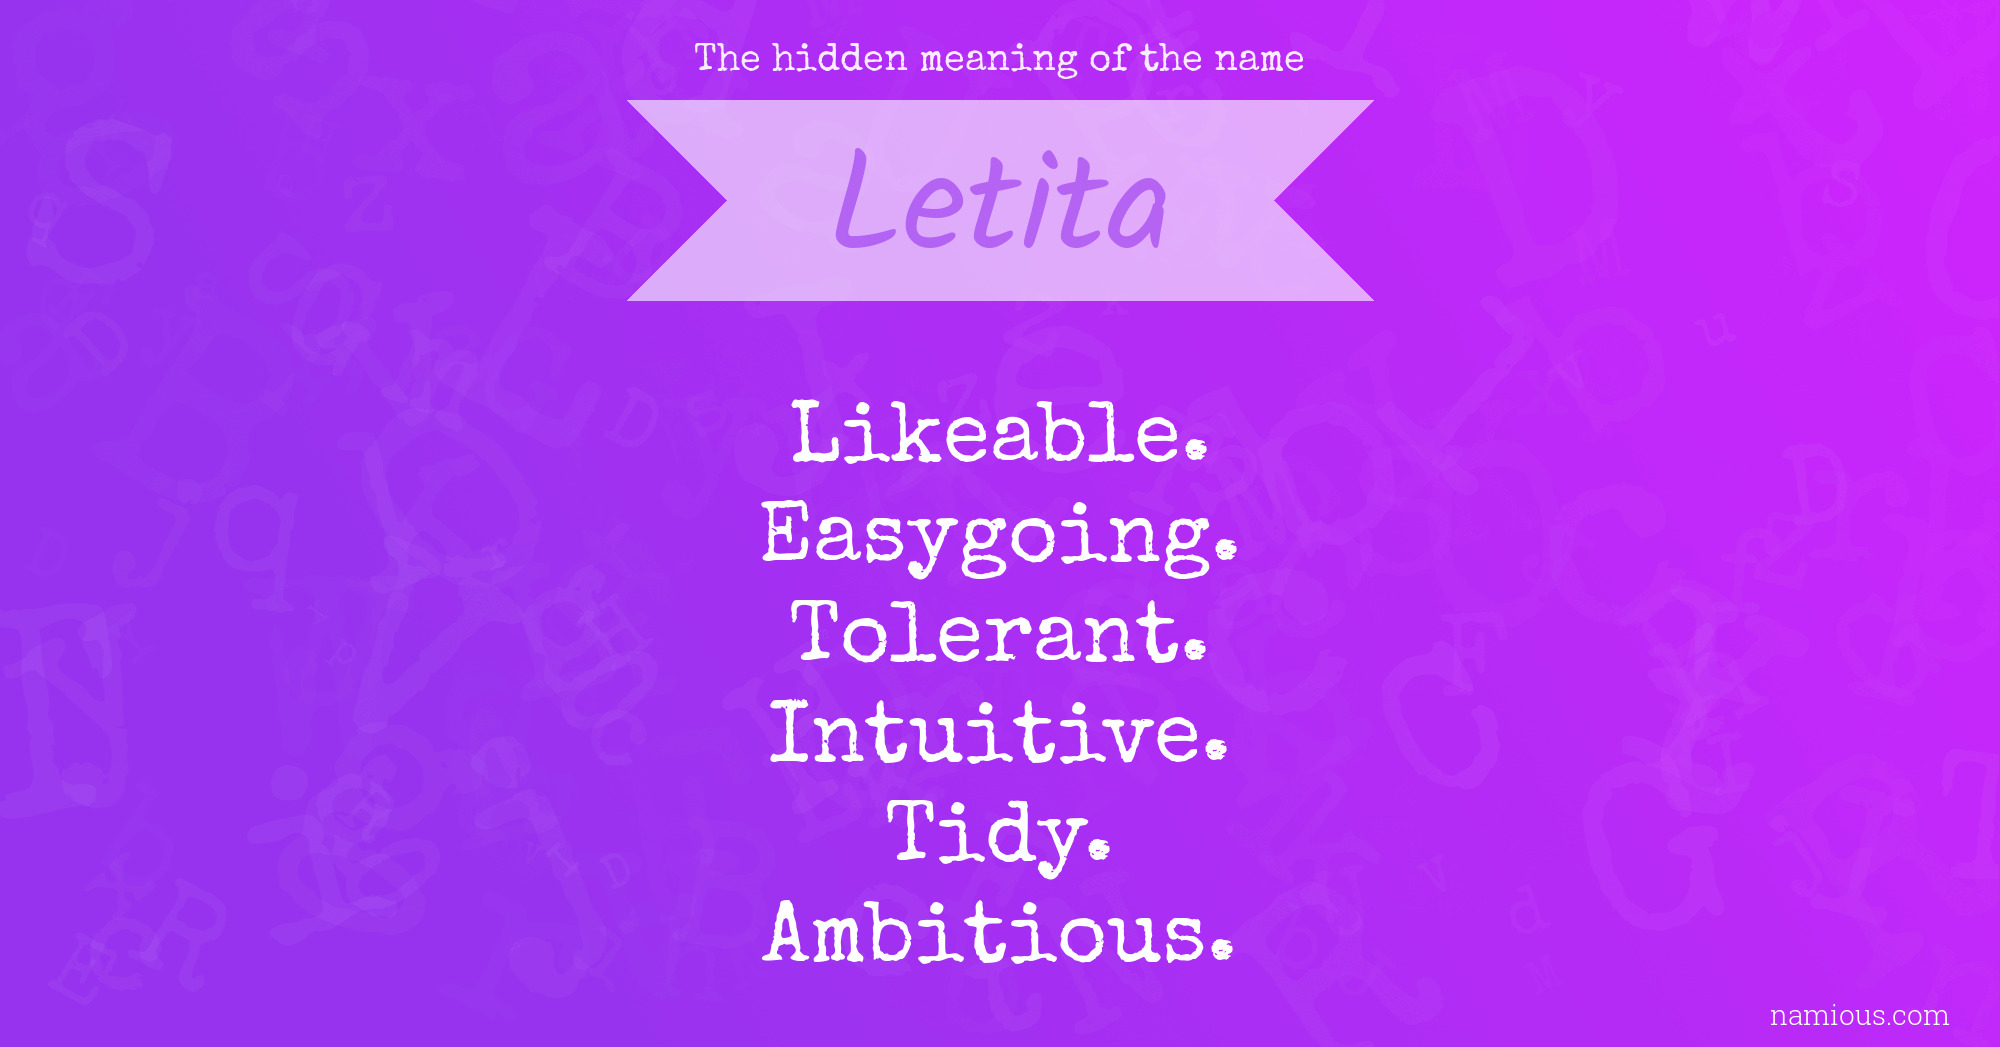 The hidden meaning of the name Letita